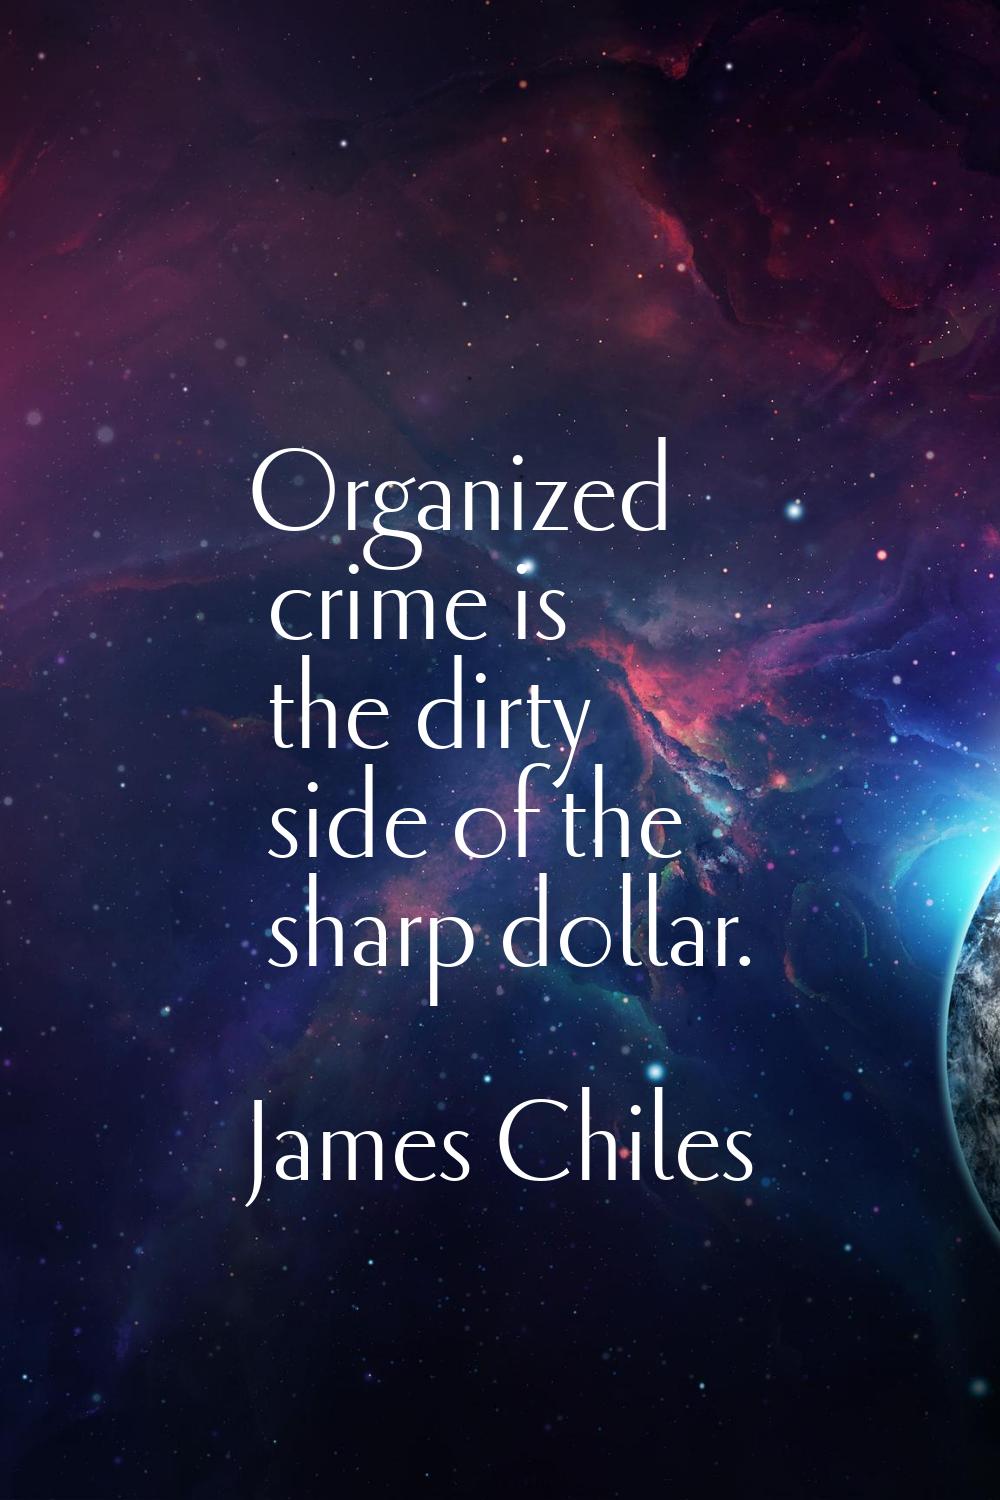 Organized crime is the dirty side of the sharp dollar.